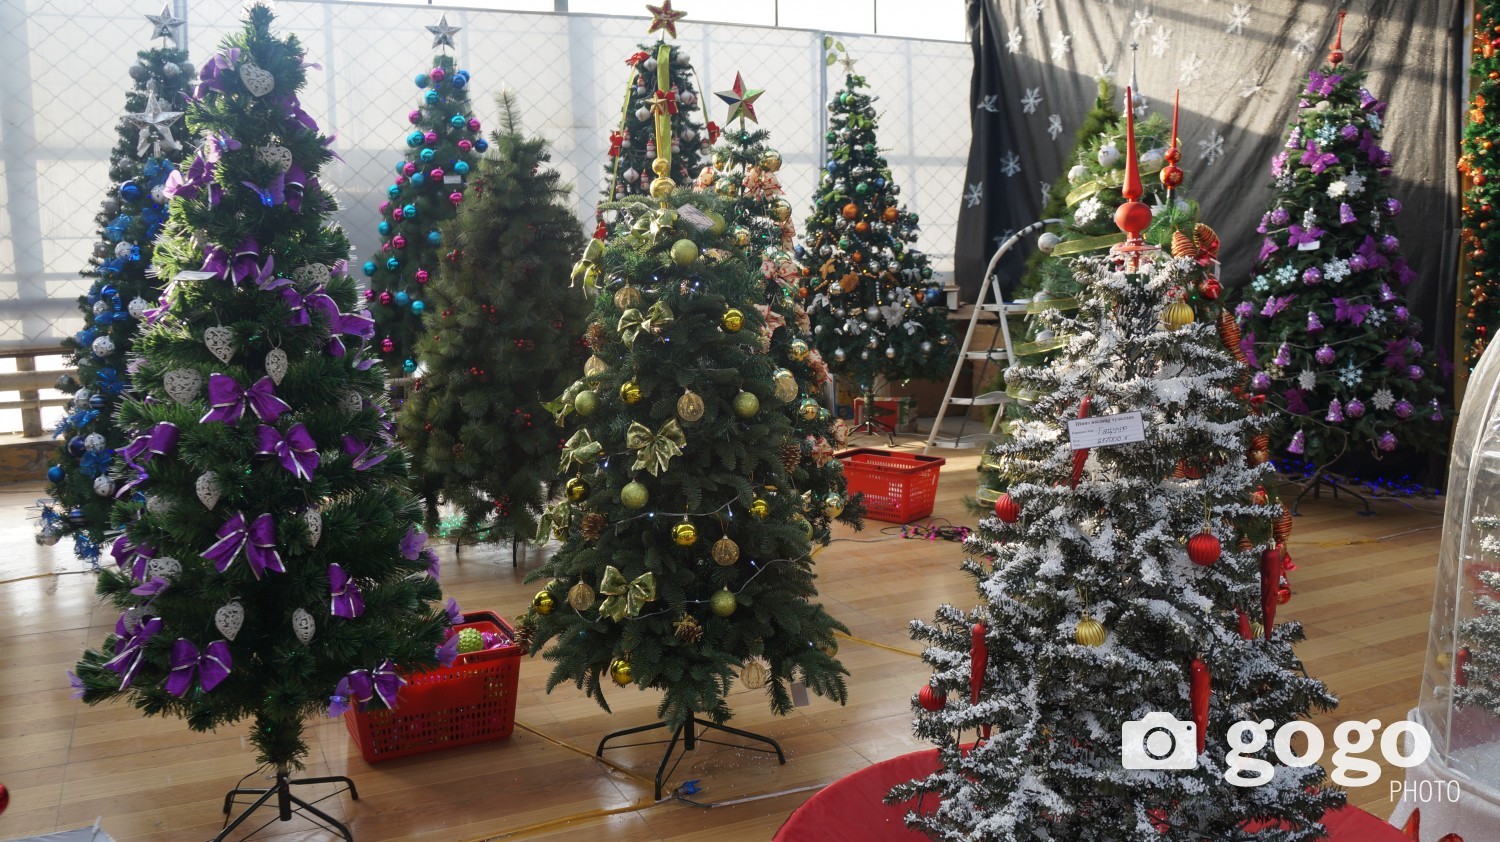 Prices for the tree is depending on its size, design and light. Tree with the height of 1.2 m is at MNT 38.950-108.000. Tree with the height of 1.5 m is at MNT 120.900-155.000. Tree with the height of 1.8 m is at MNT 125.000-250.000. Tree with the height of 2.1 m is at MNT 250.000-295.000. Tree with the height of 2.7 m is at MNT 410.000-495.000. 